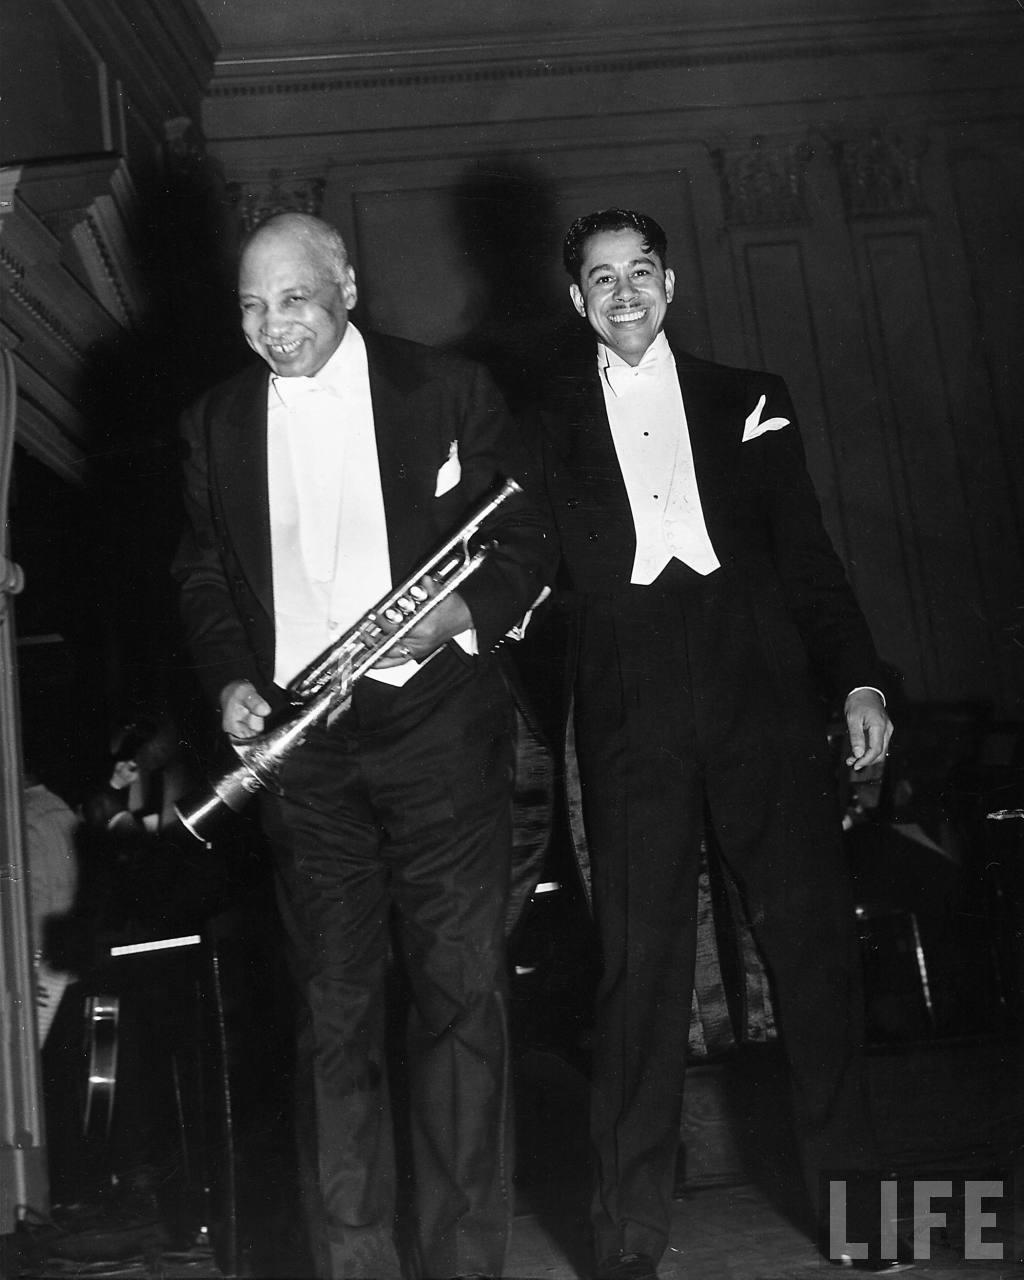 November 21, 1938: celebrate WC Handy’s birthday with Cab Calloway at Carnegie Hall